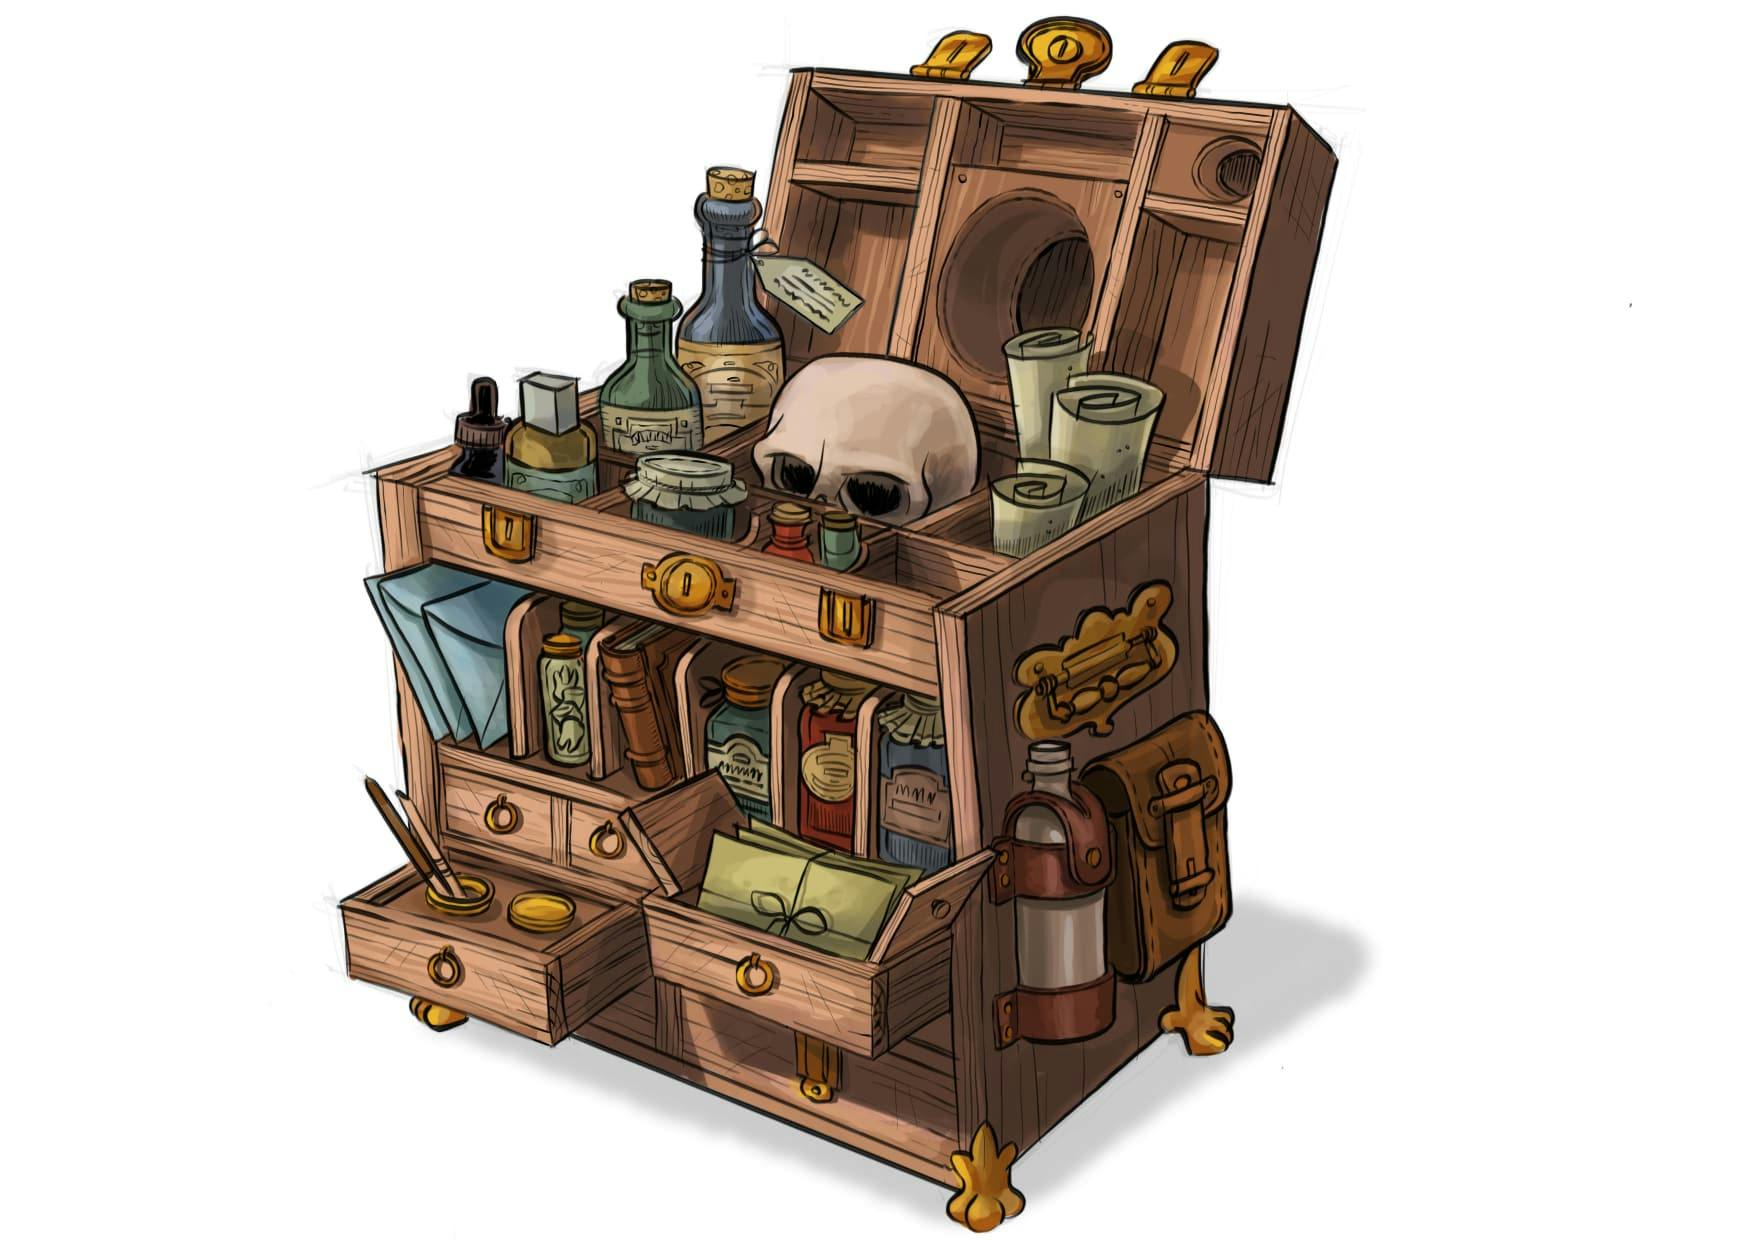 A potion master's chest